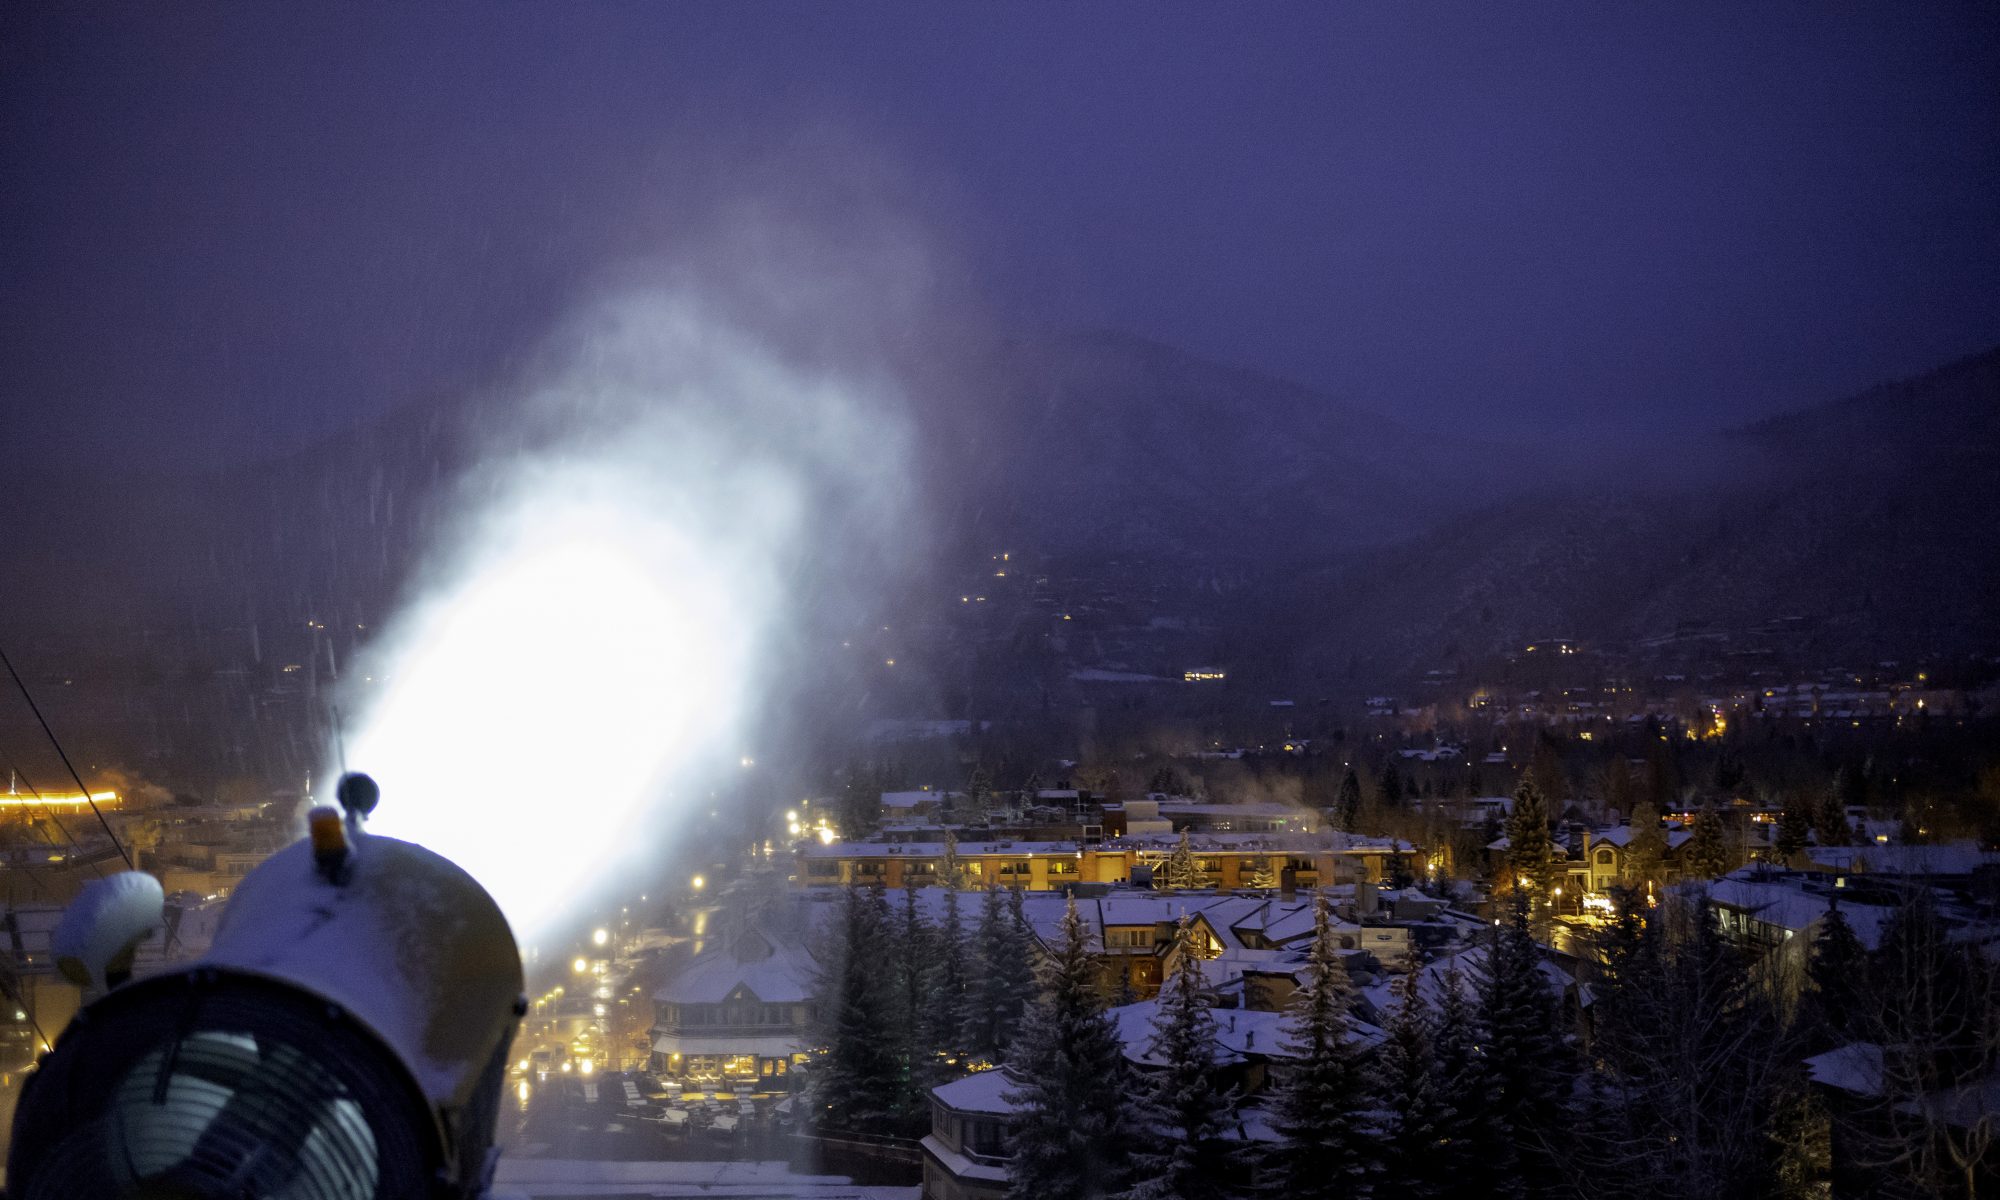 Ajax - Aspen Mountain Snowmaking -picture by Dan Bayer. Aspen Skiing Company. Snowmaking Operations Underway at Aspen Snowmass for the 2018-19 Season